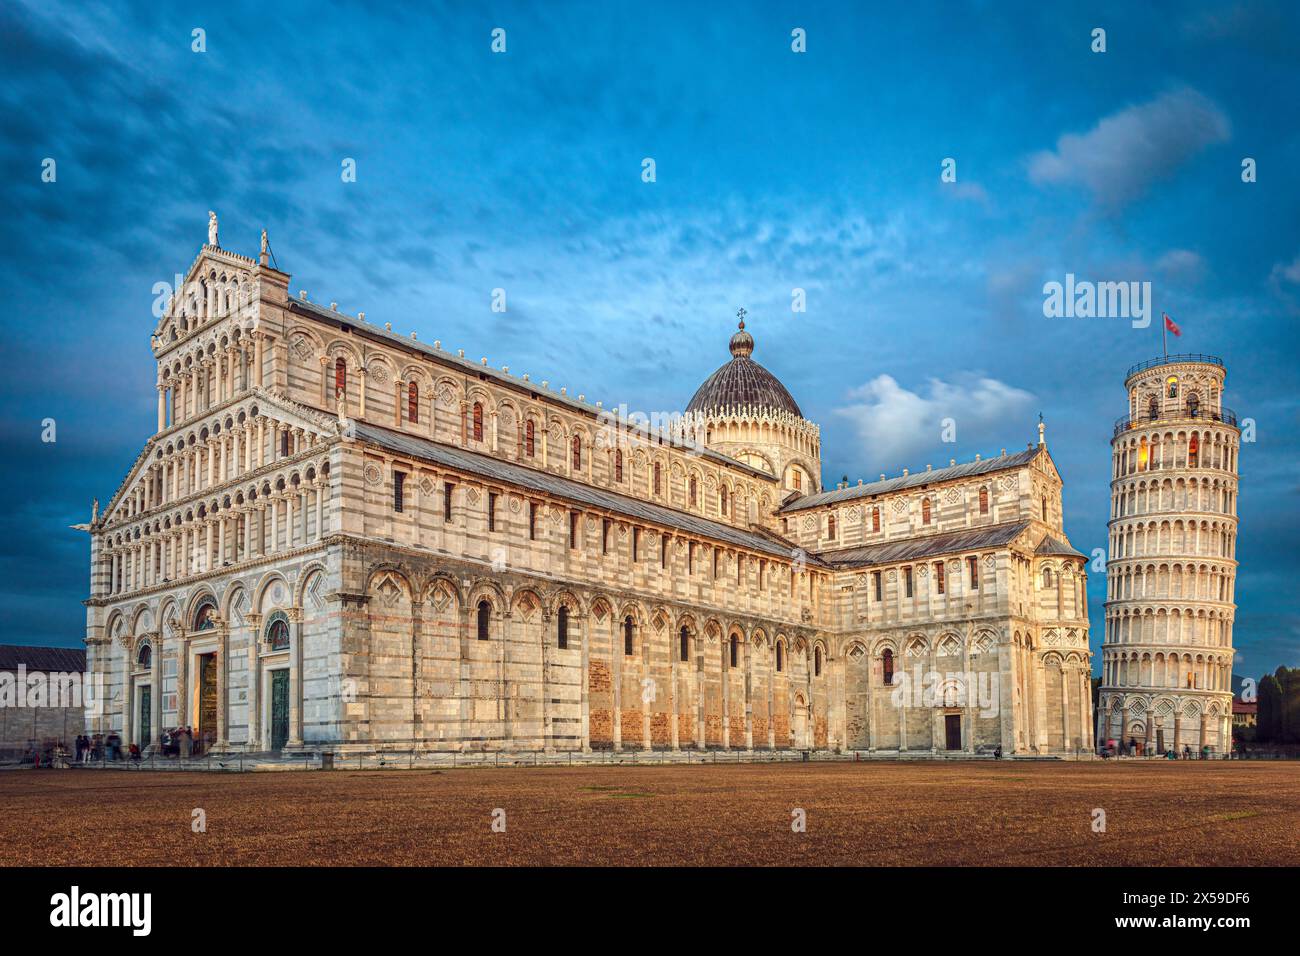 The city of Pisa historic plaza with the Pisa cathedral and the leaning tower illuminated by the blue hour light. Photo taken on 22nd of October 2023 Stock Photo